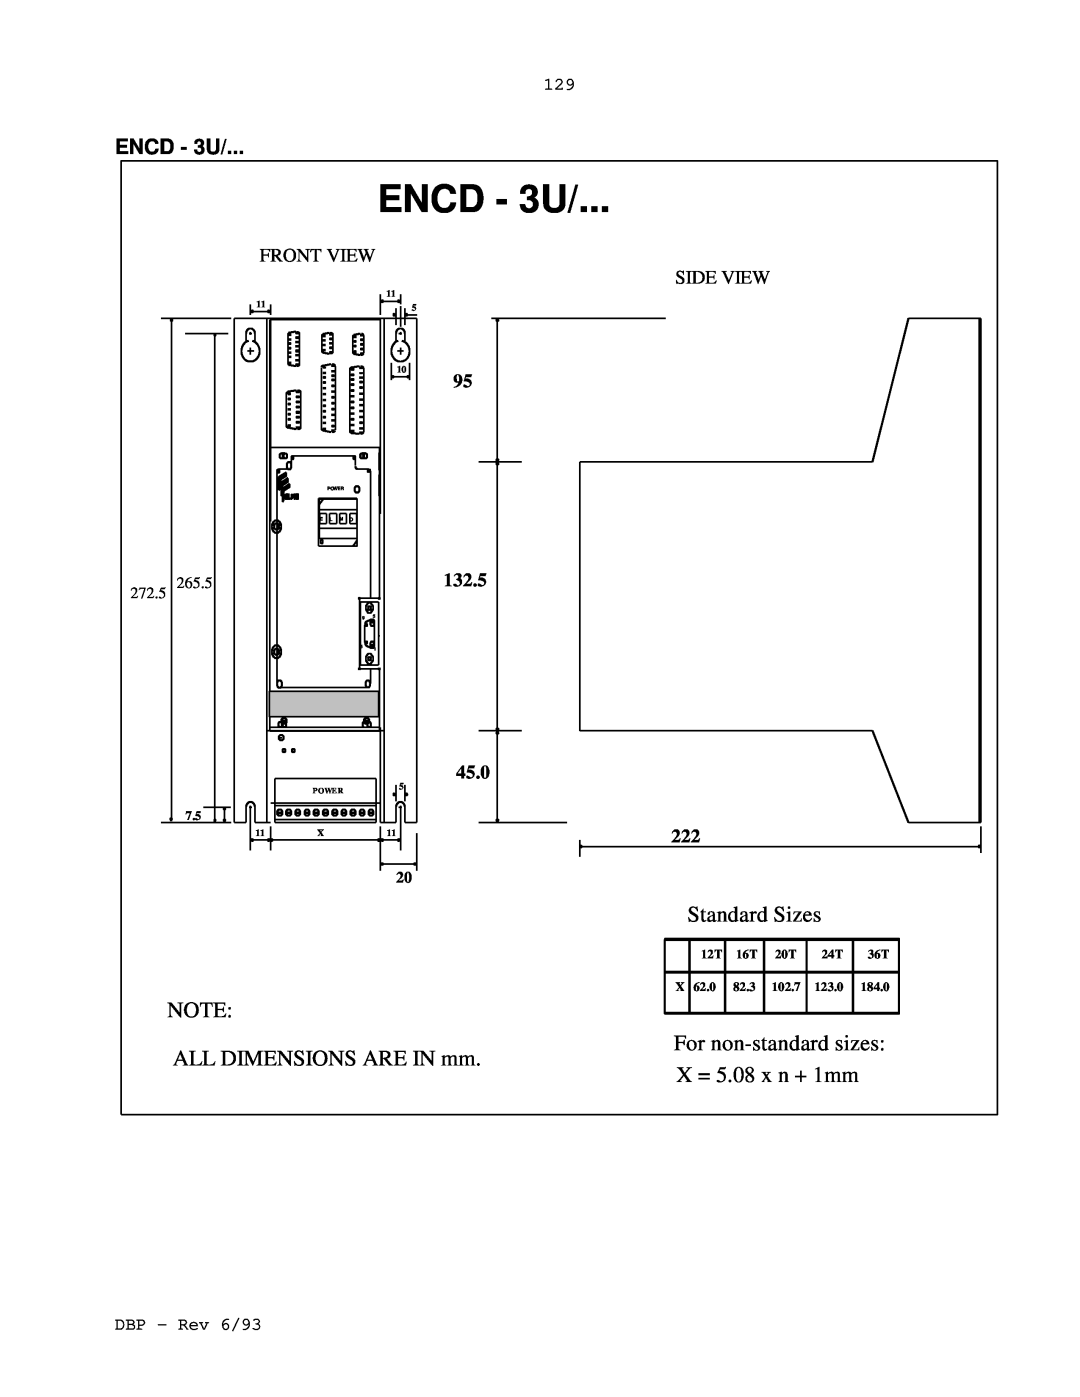 Elmo DBP SERIES ENCD - 3U, Standard Sizes, ALL DIMENSIONS ARE IN mm, For non-standardsizes X = 5.08 x n + 1mm, Front View 